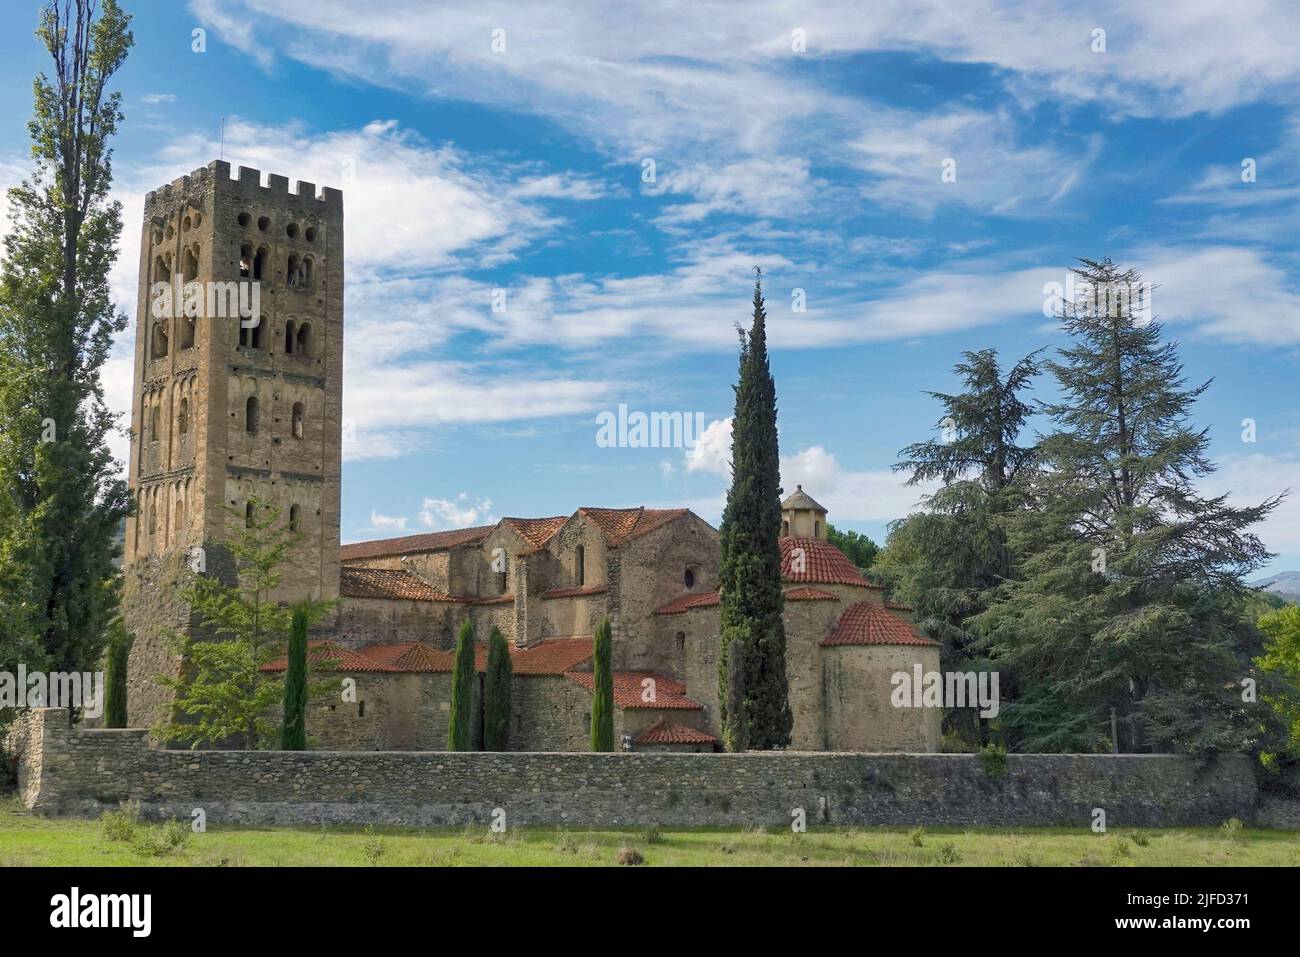 An abbey of Saint-Michel-de-Cuxa surrounded by growing trees under blue bright sky Stock Photo